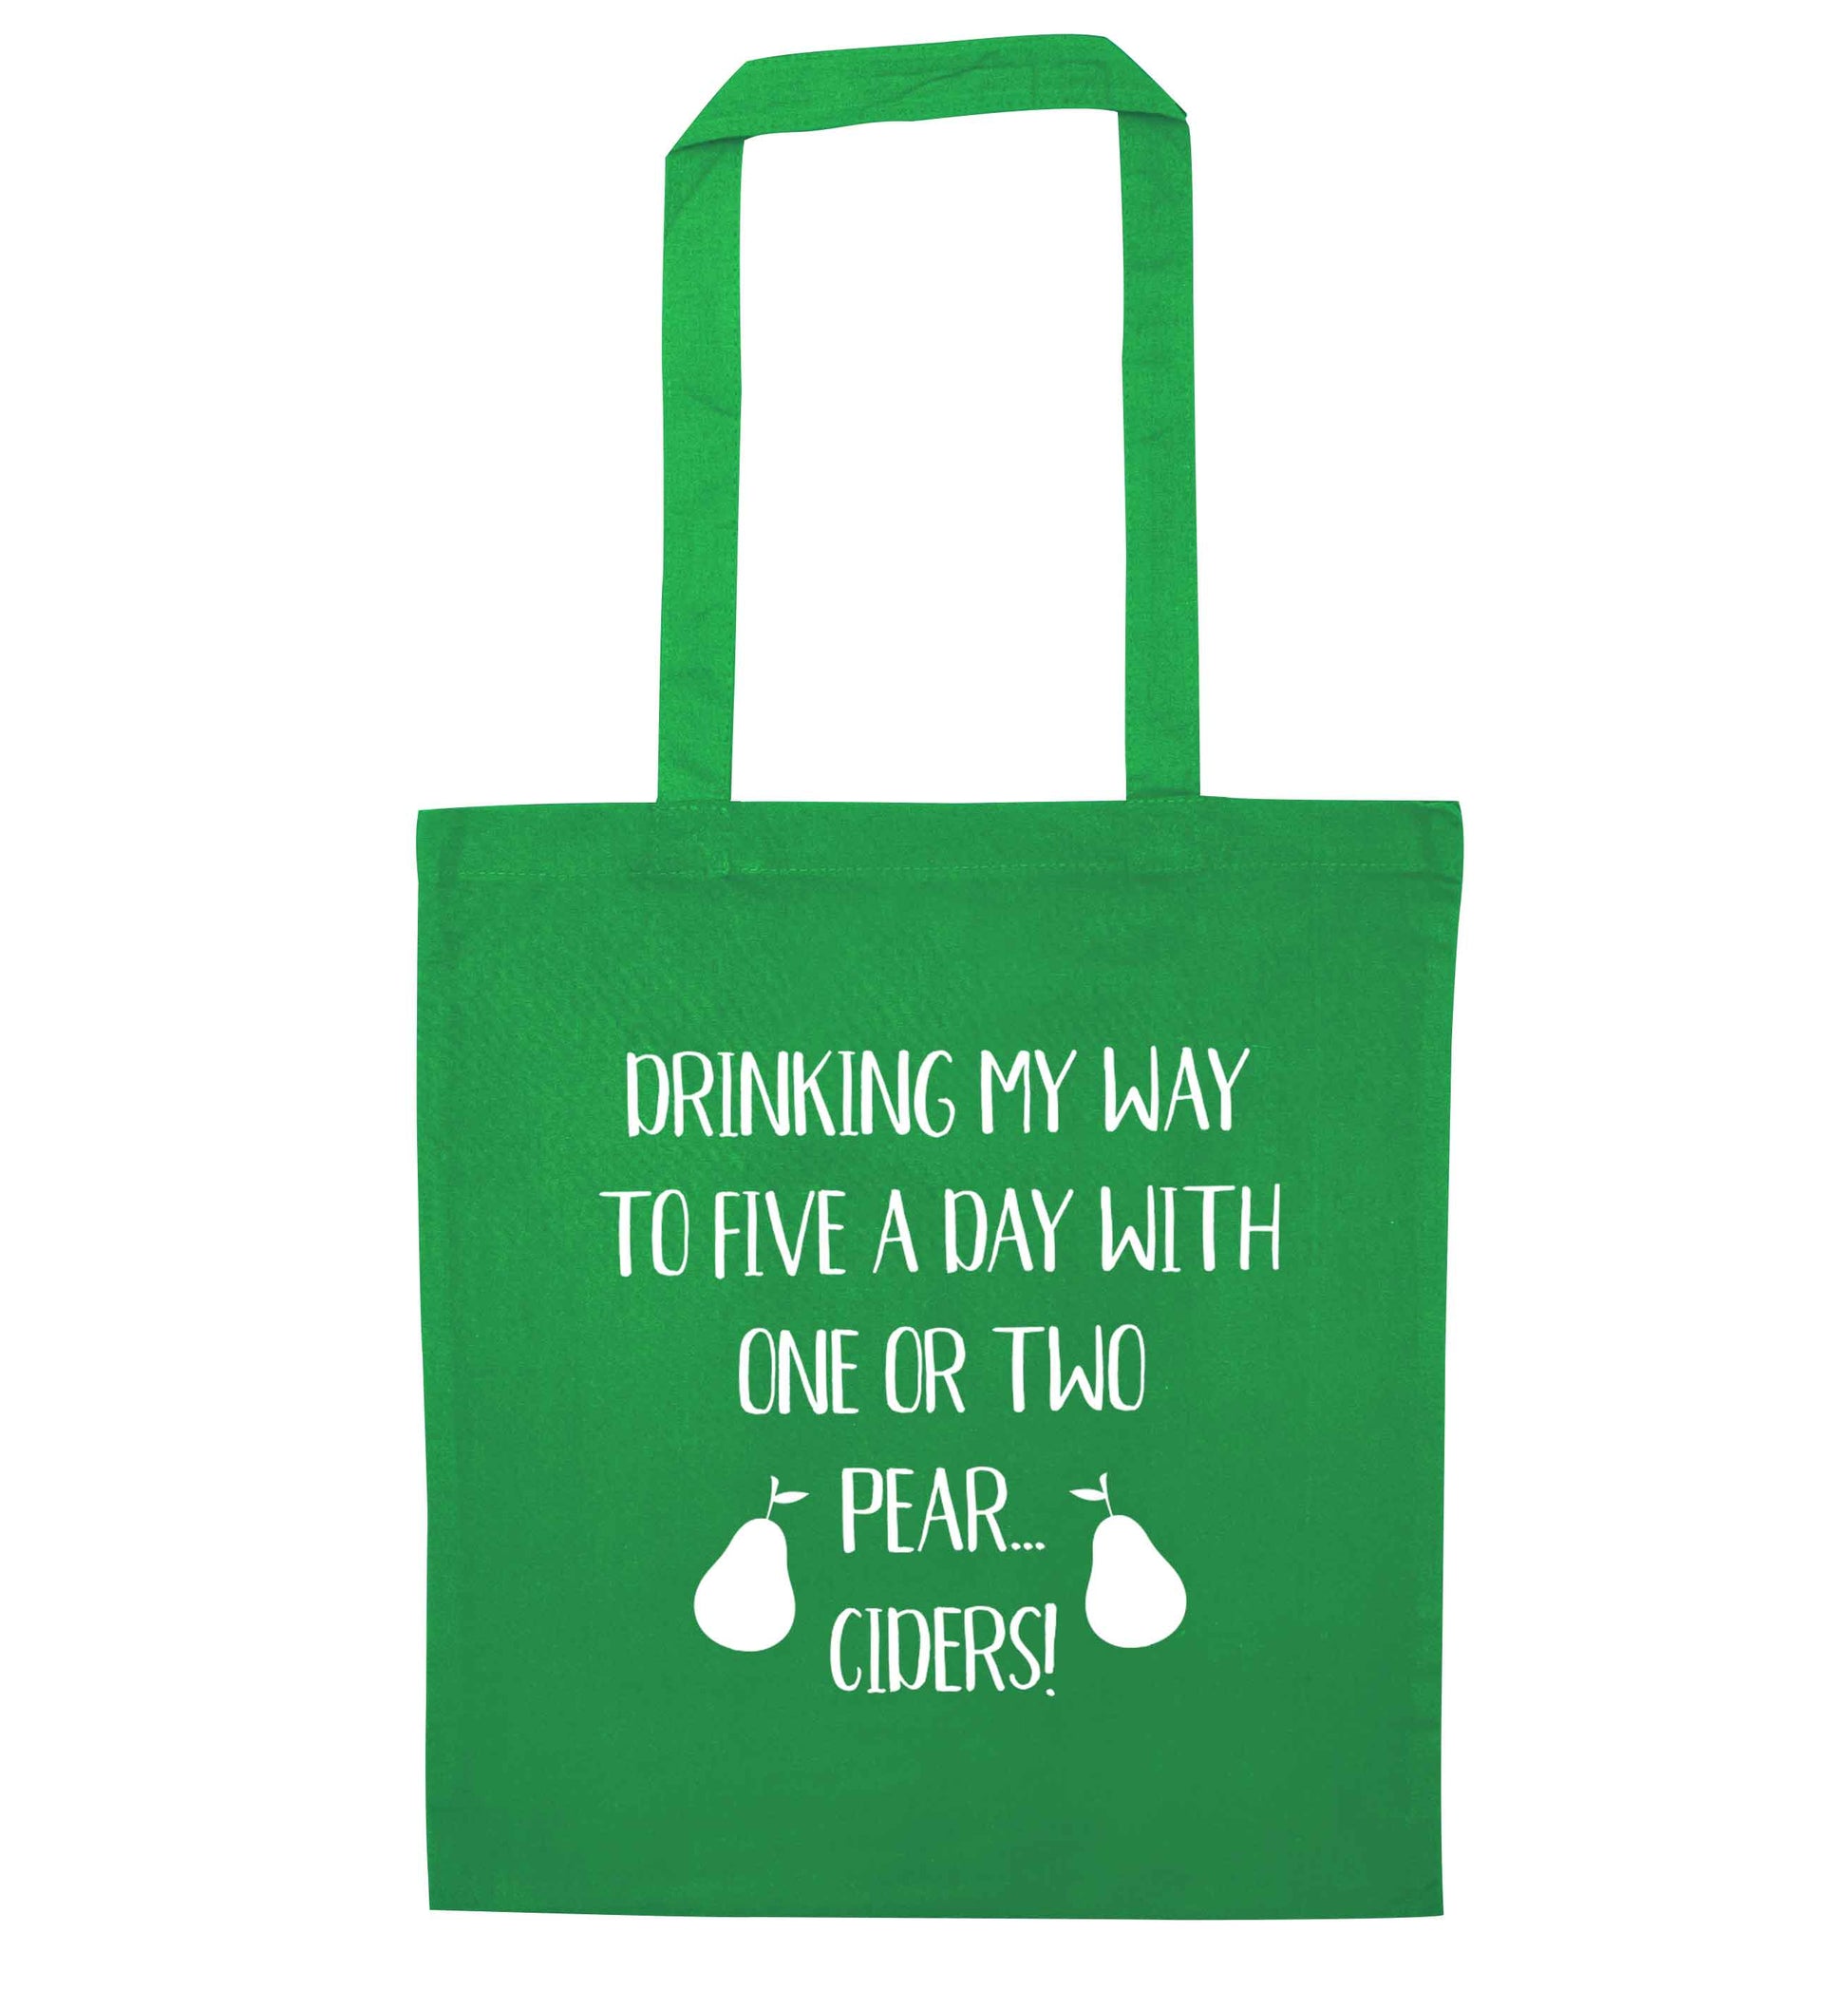 Drinking my way to five a day with one or two strawberry ciders green tote bag